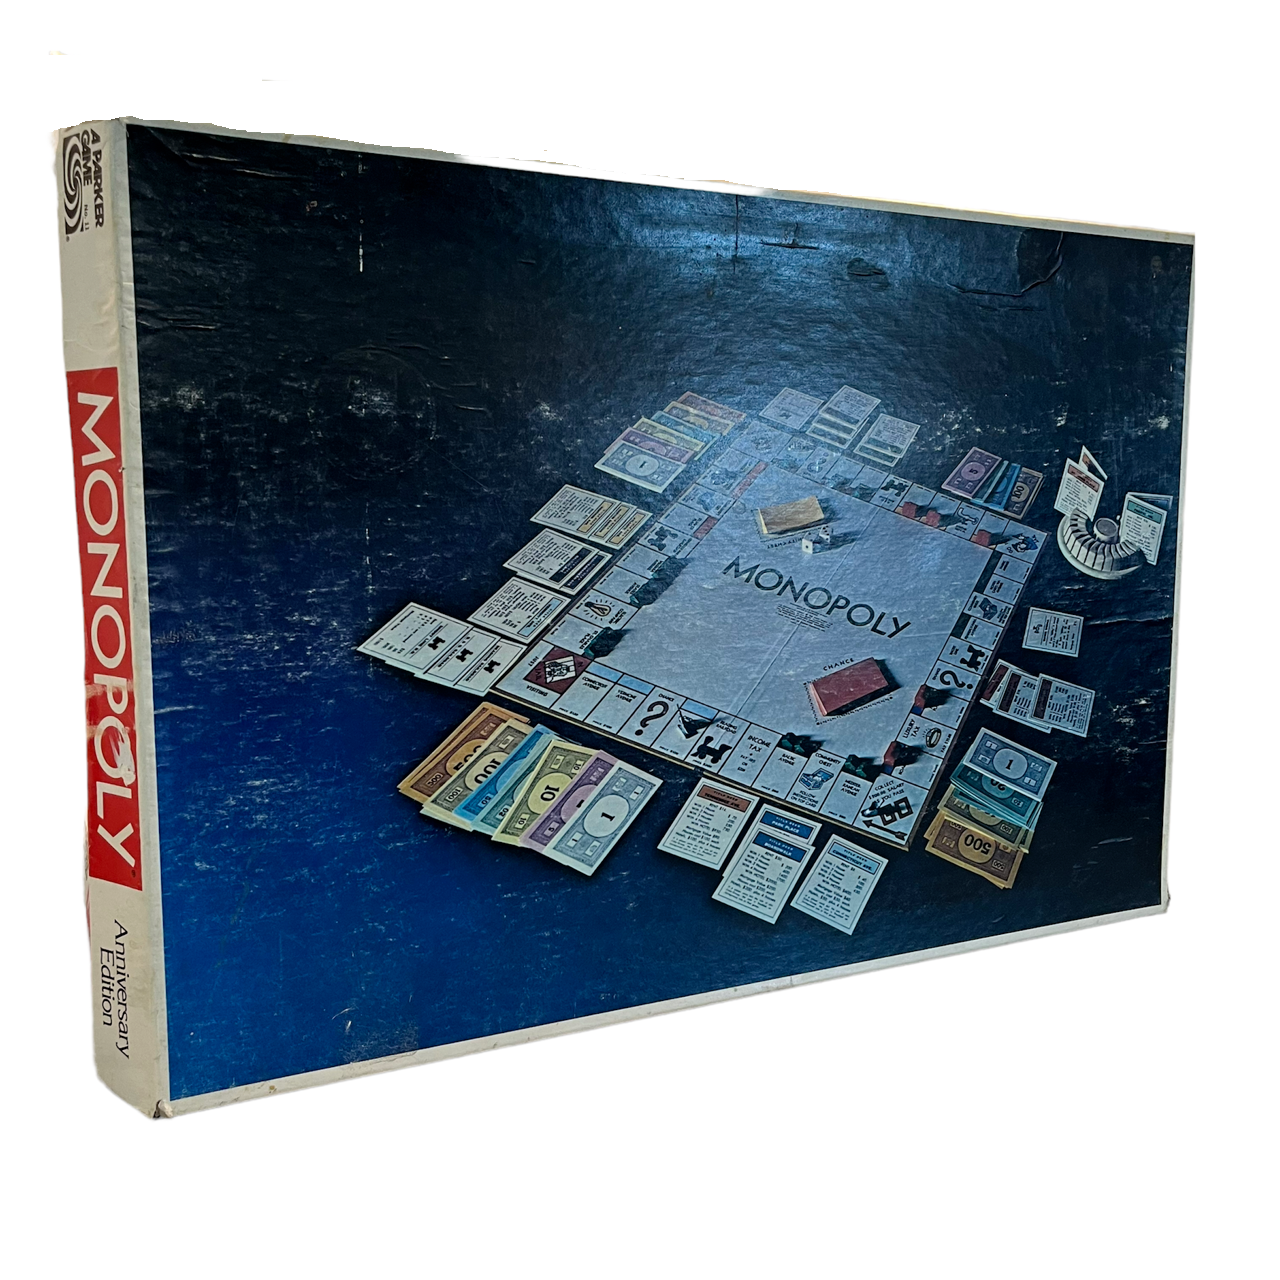 Monopoly Game 40th Anniversary Edition Vintage 1974 By Parker Brothers Very Nice - $22.41